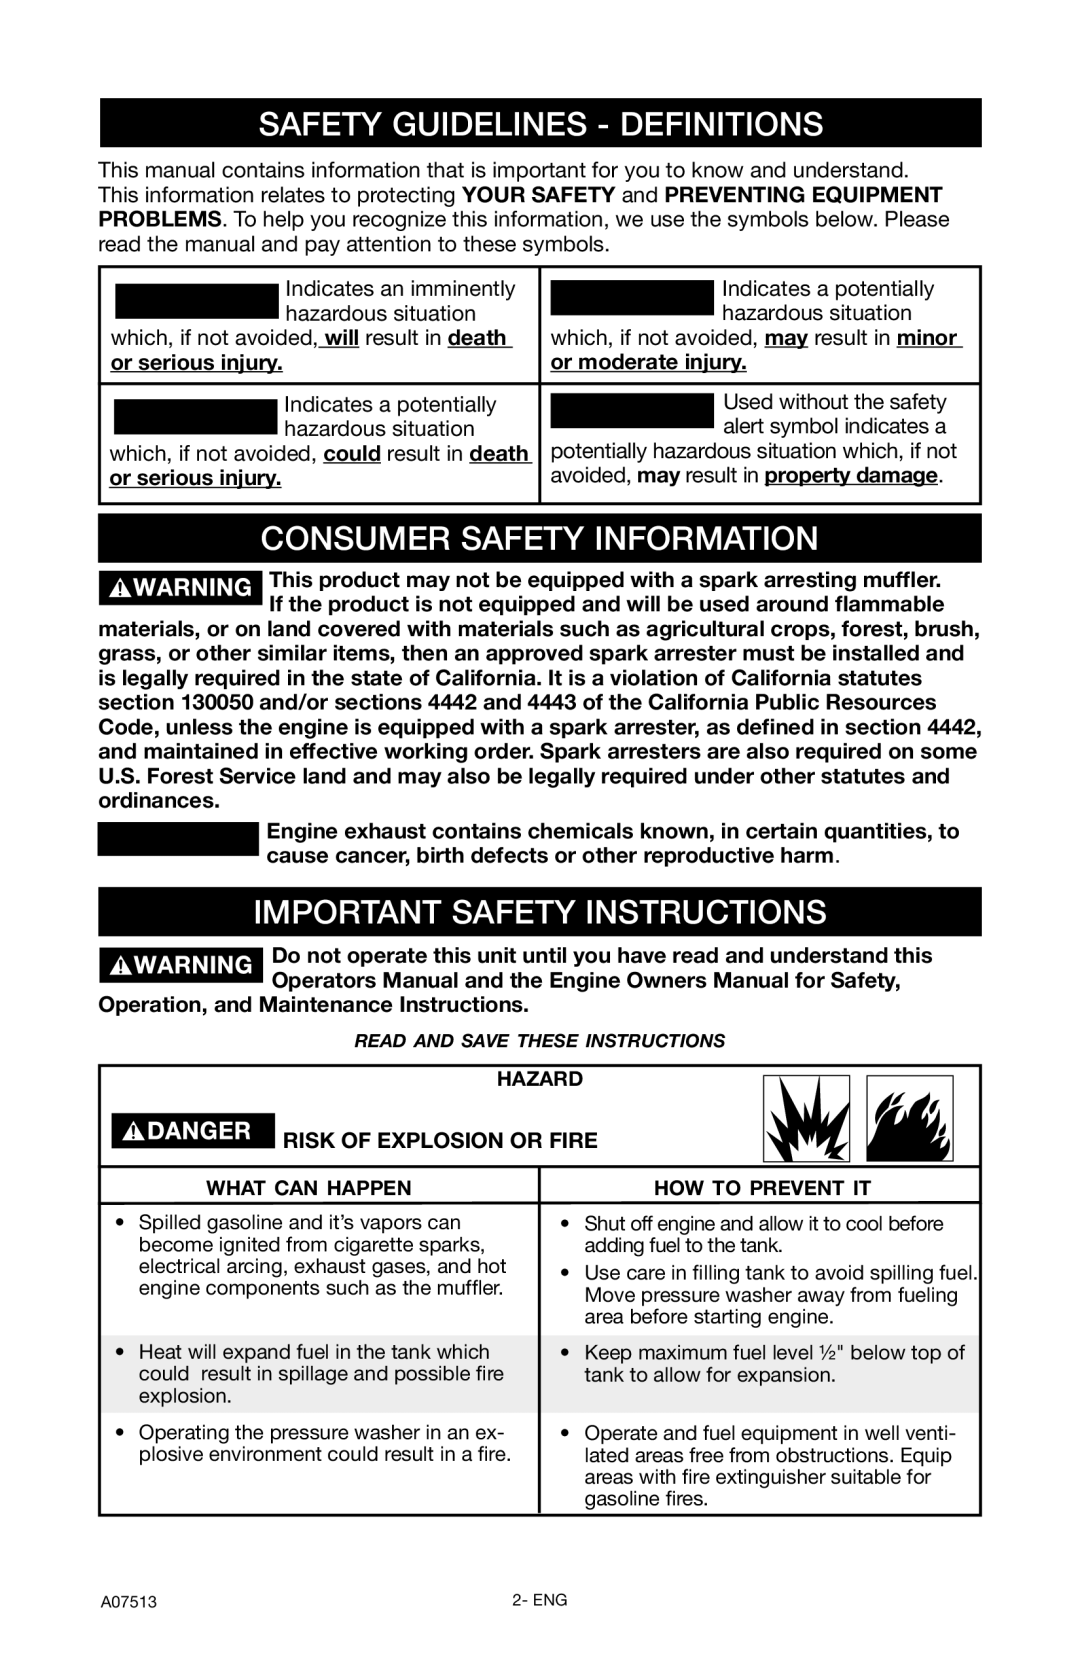 Porter-Cable A07513-0412-0 Safety Guidelines - Definitions, Consumer Safety Information, Important Safety Instructions 